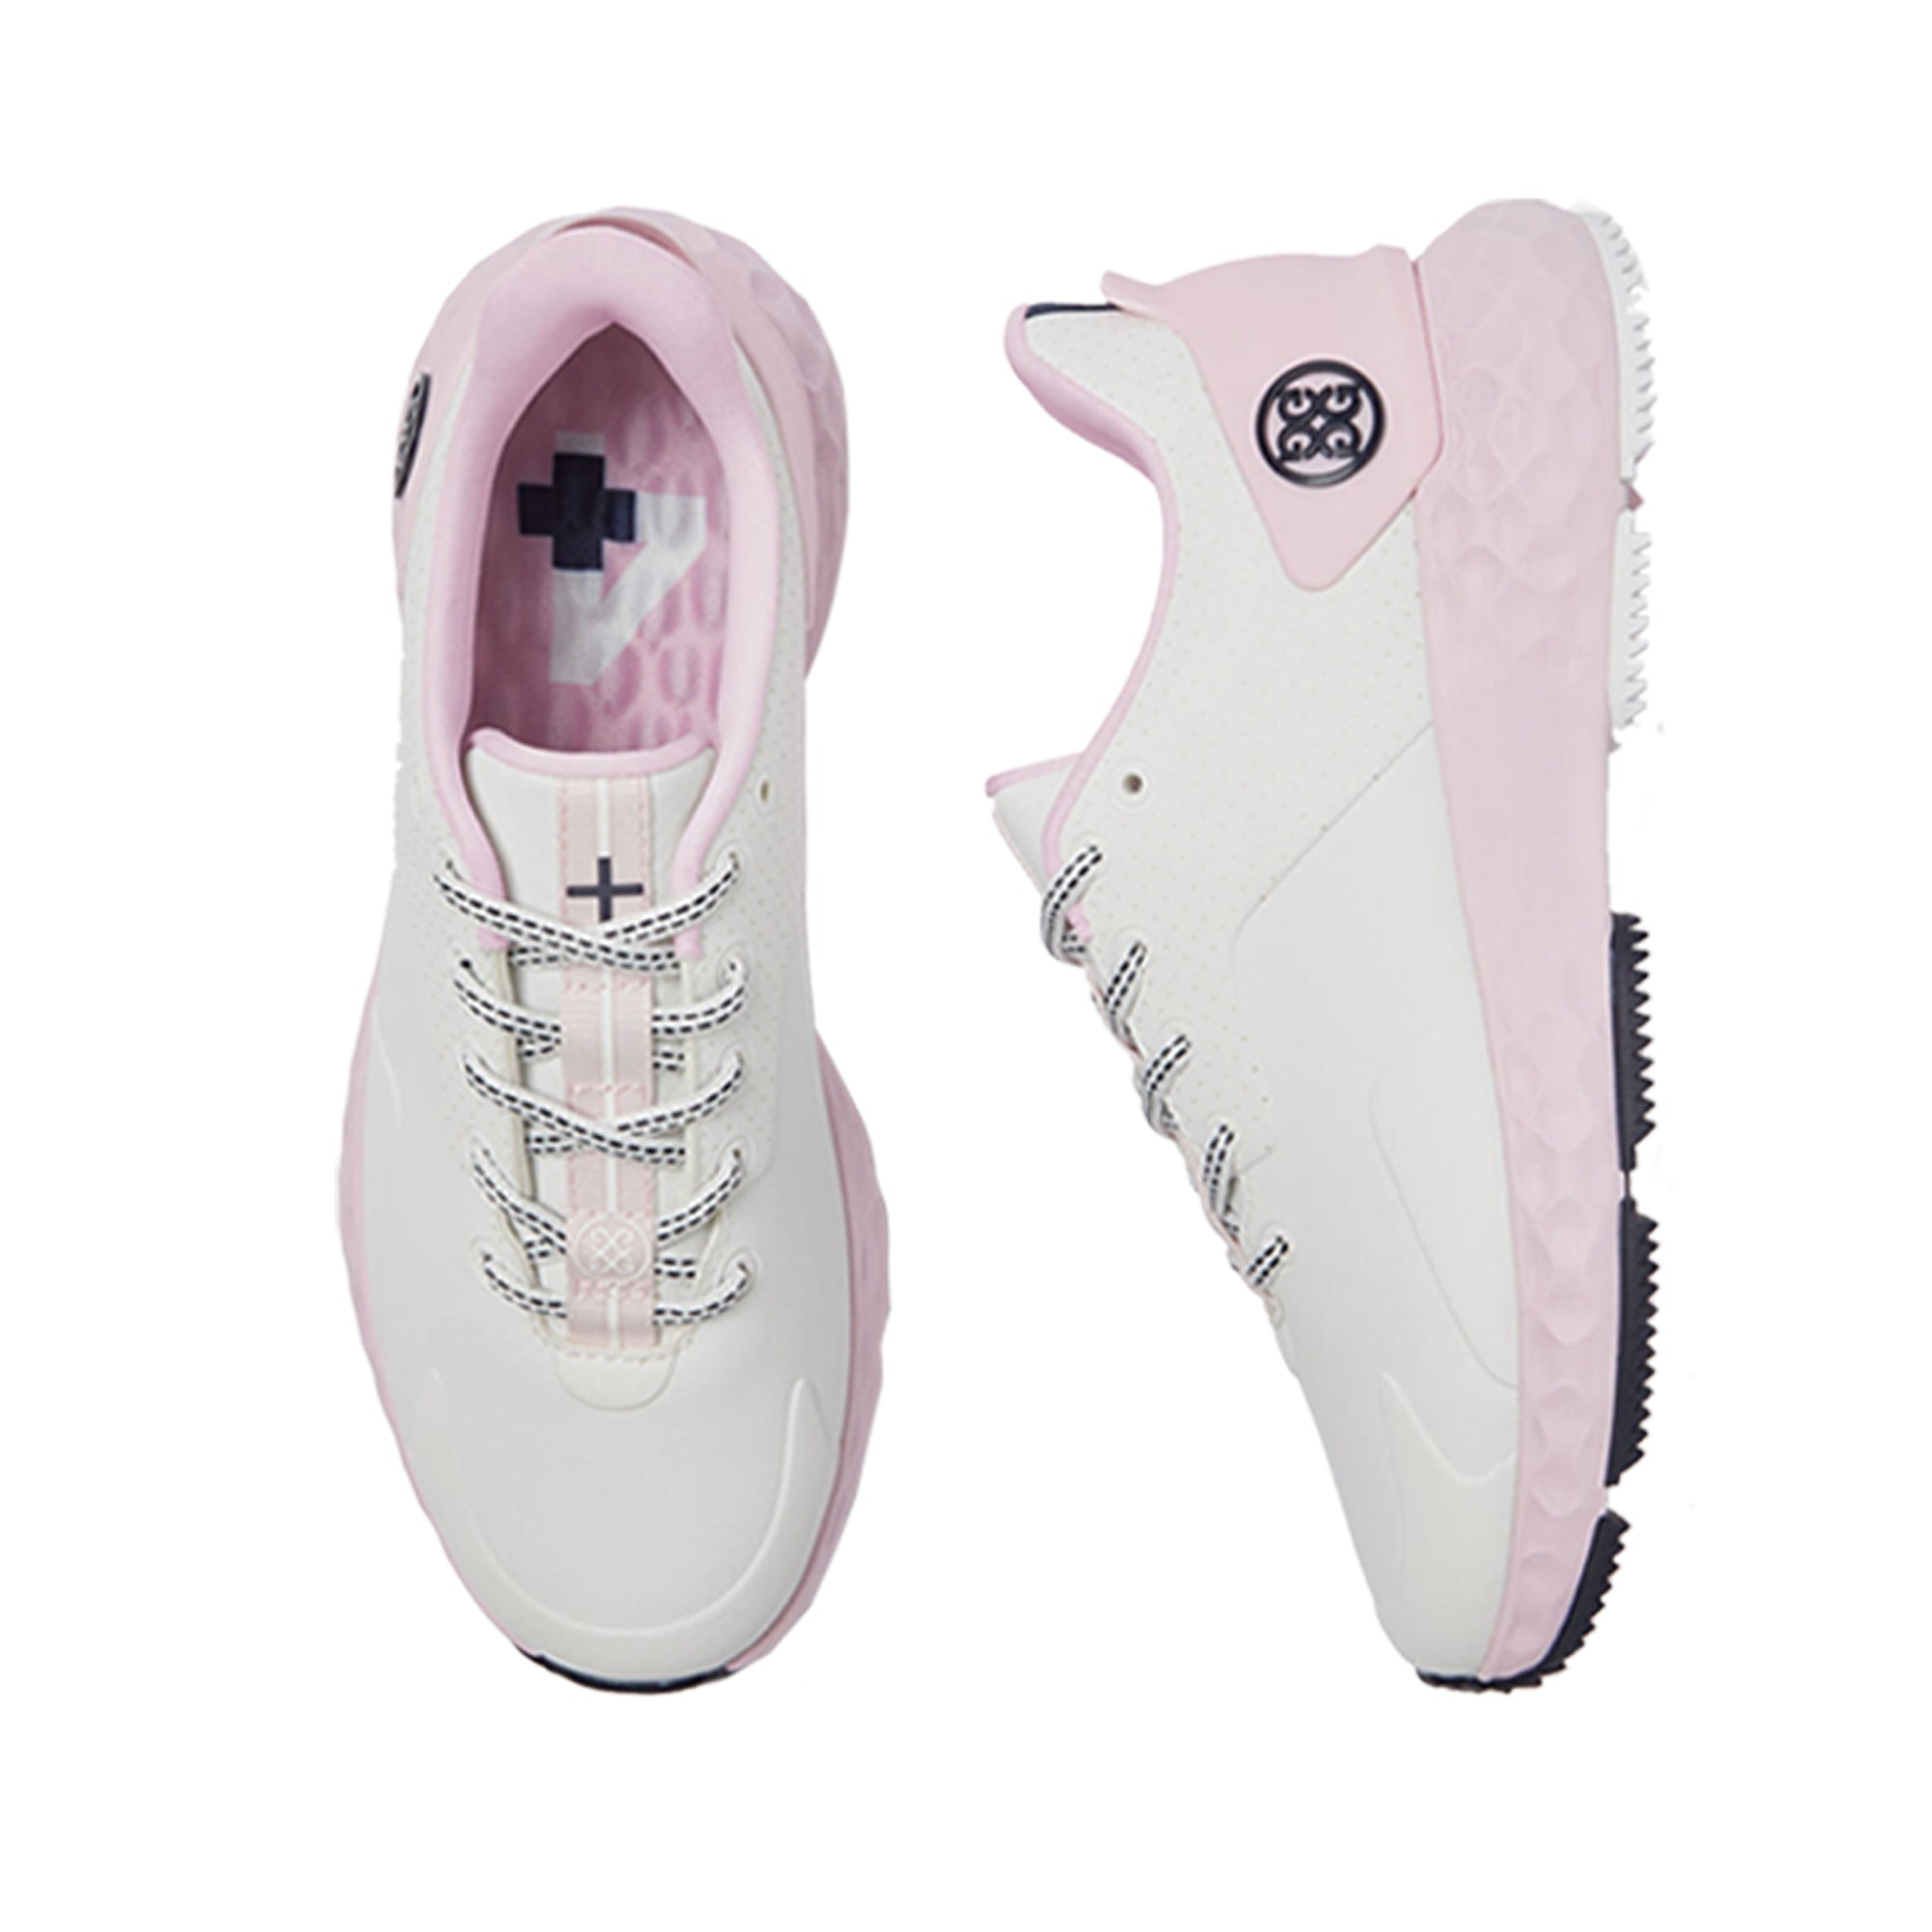 G/Fore Women's Perforated MG4 + Golf Shoe